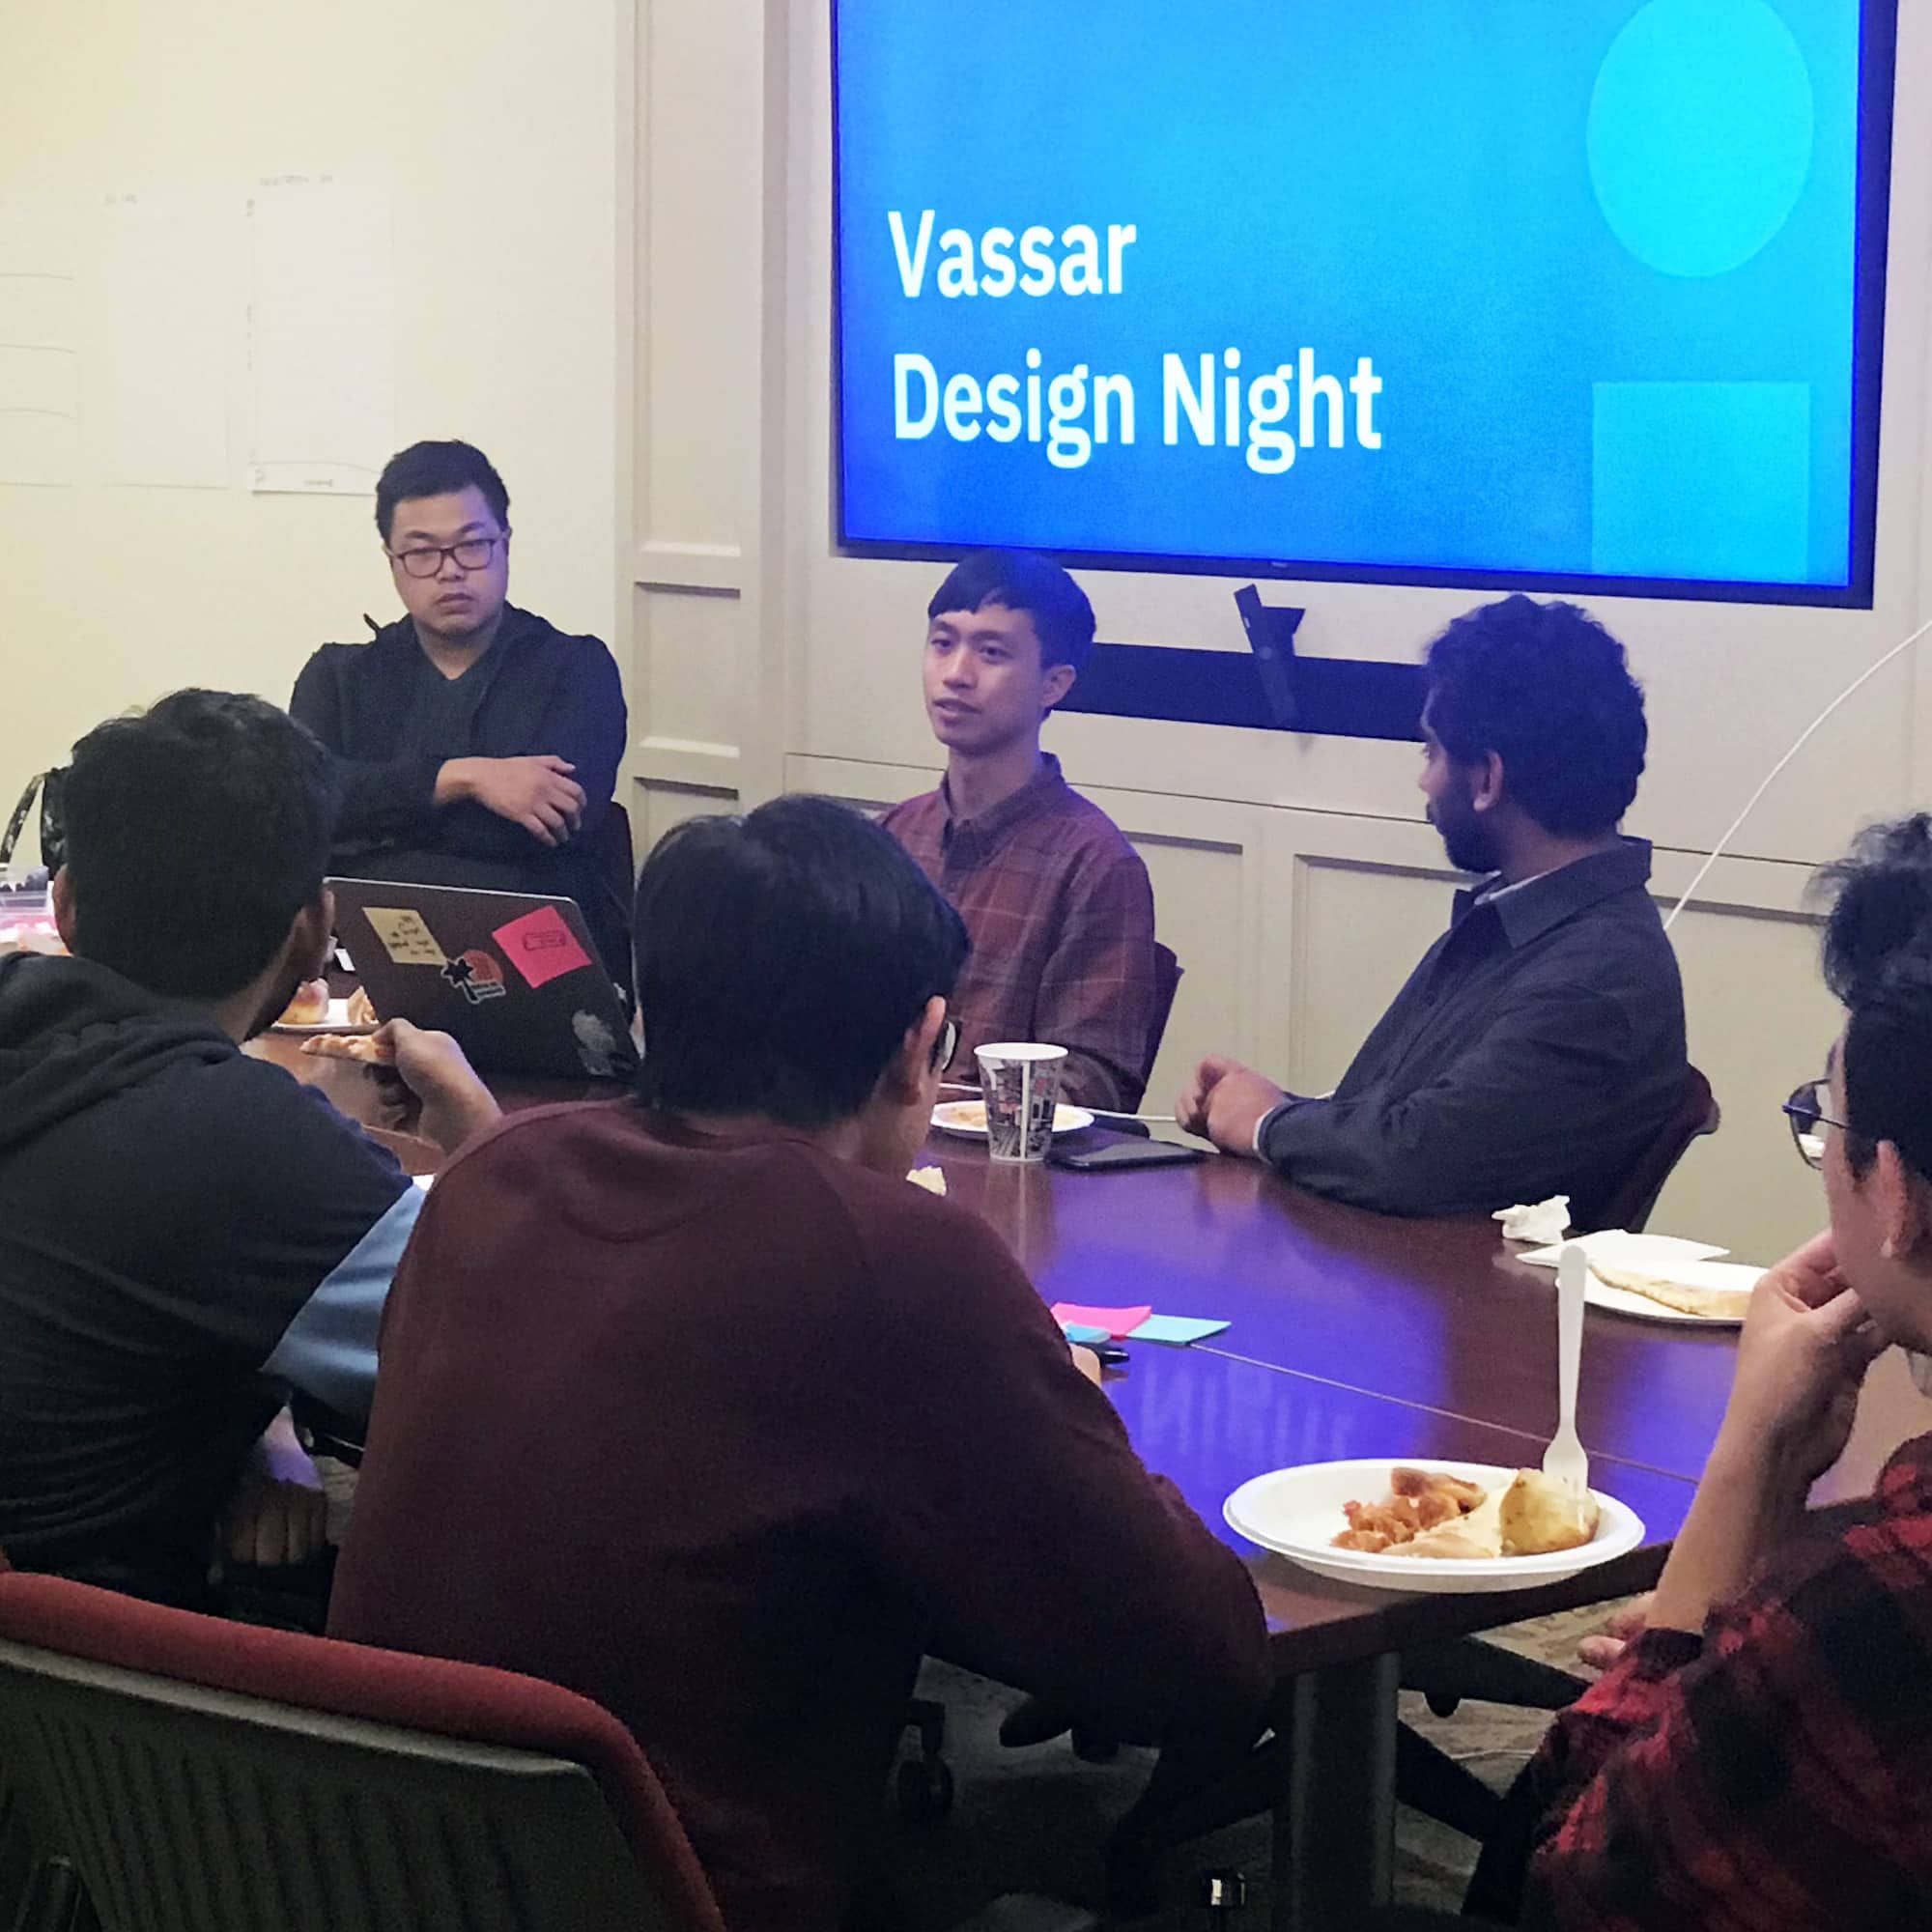 People in discussion at a table for a Vassar Design Night